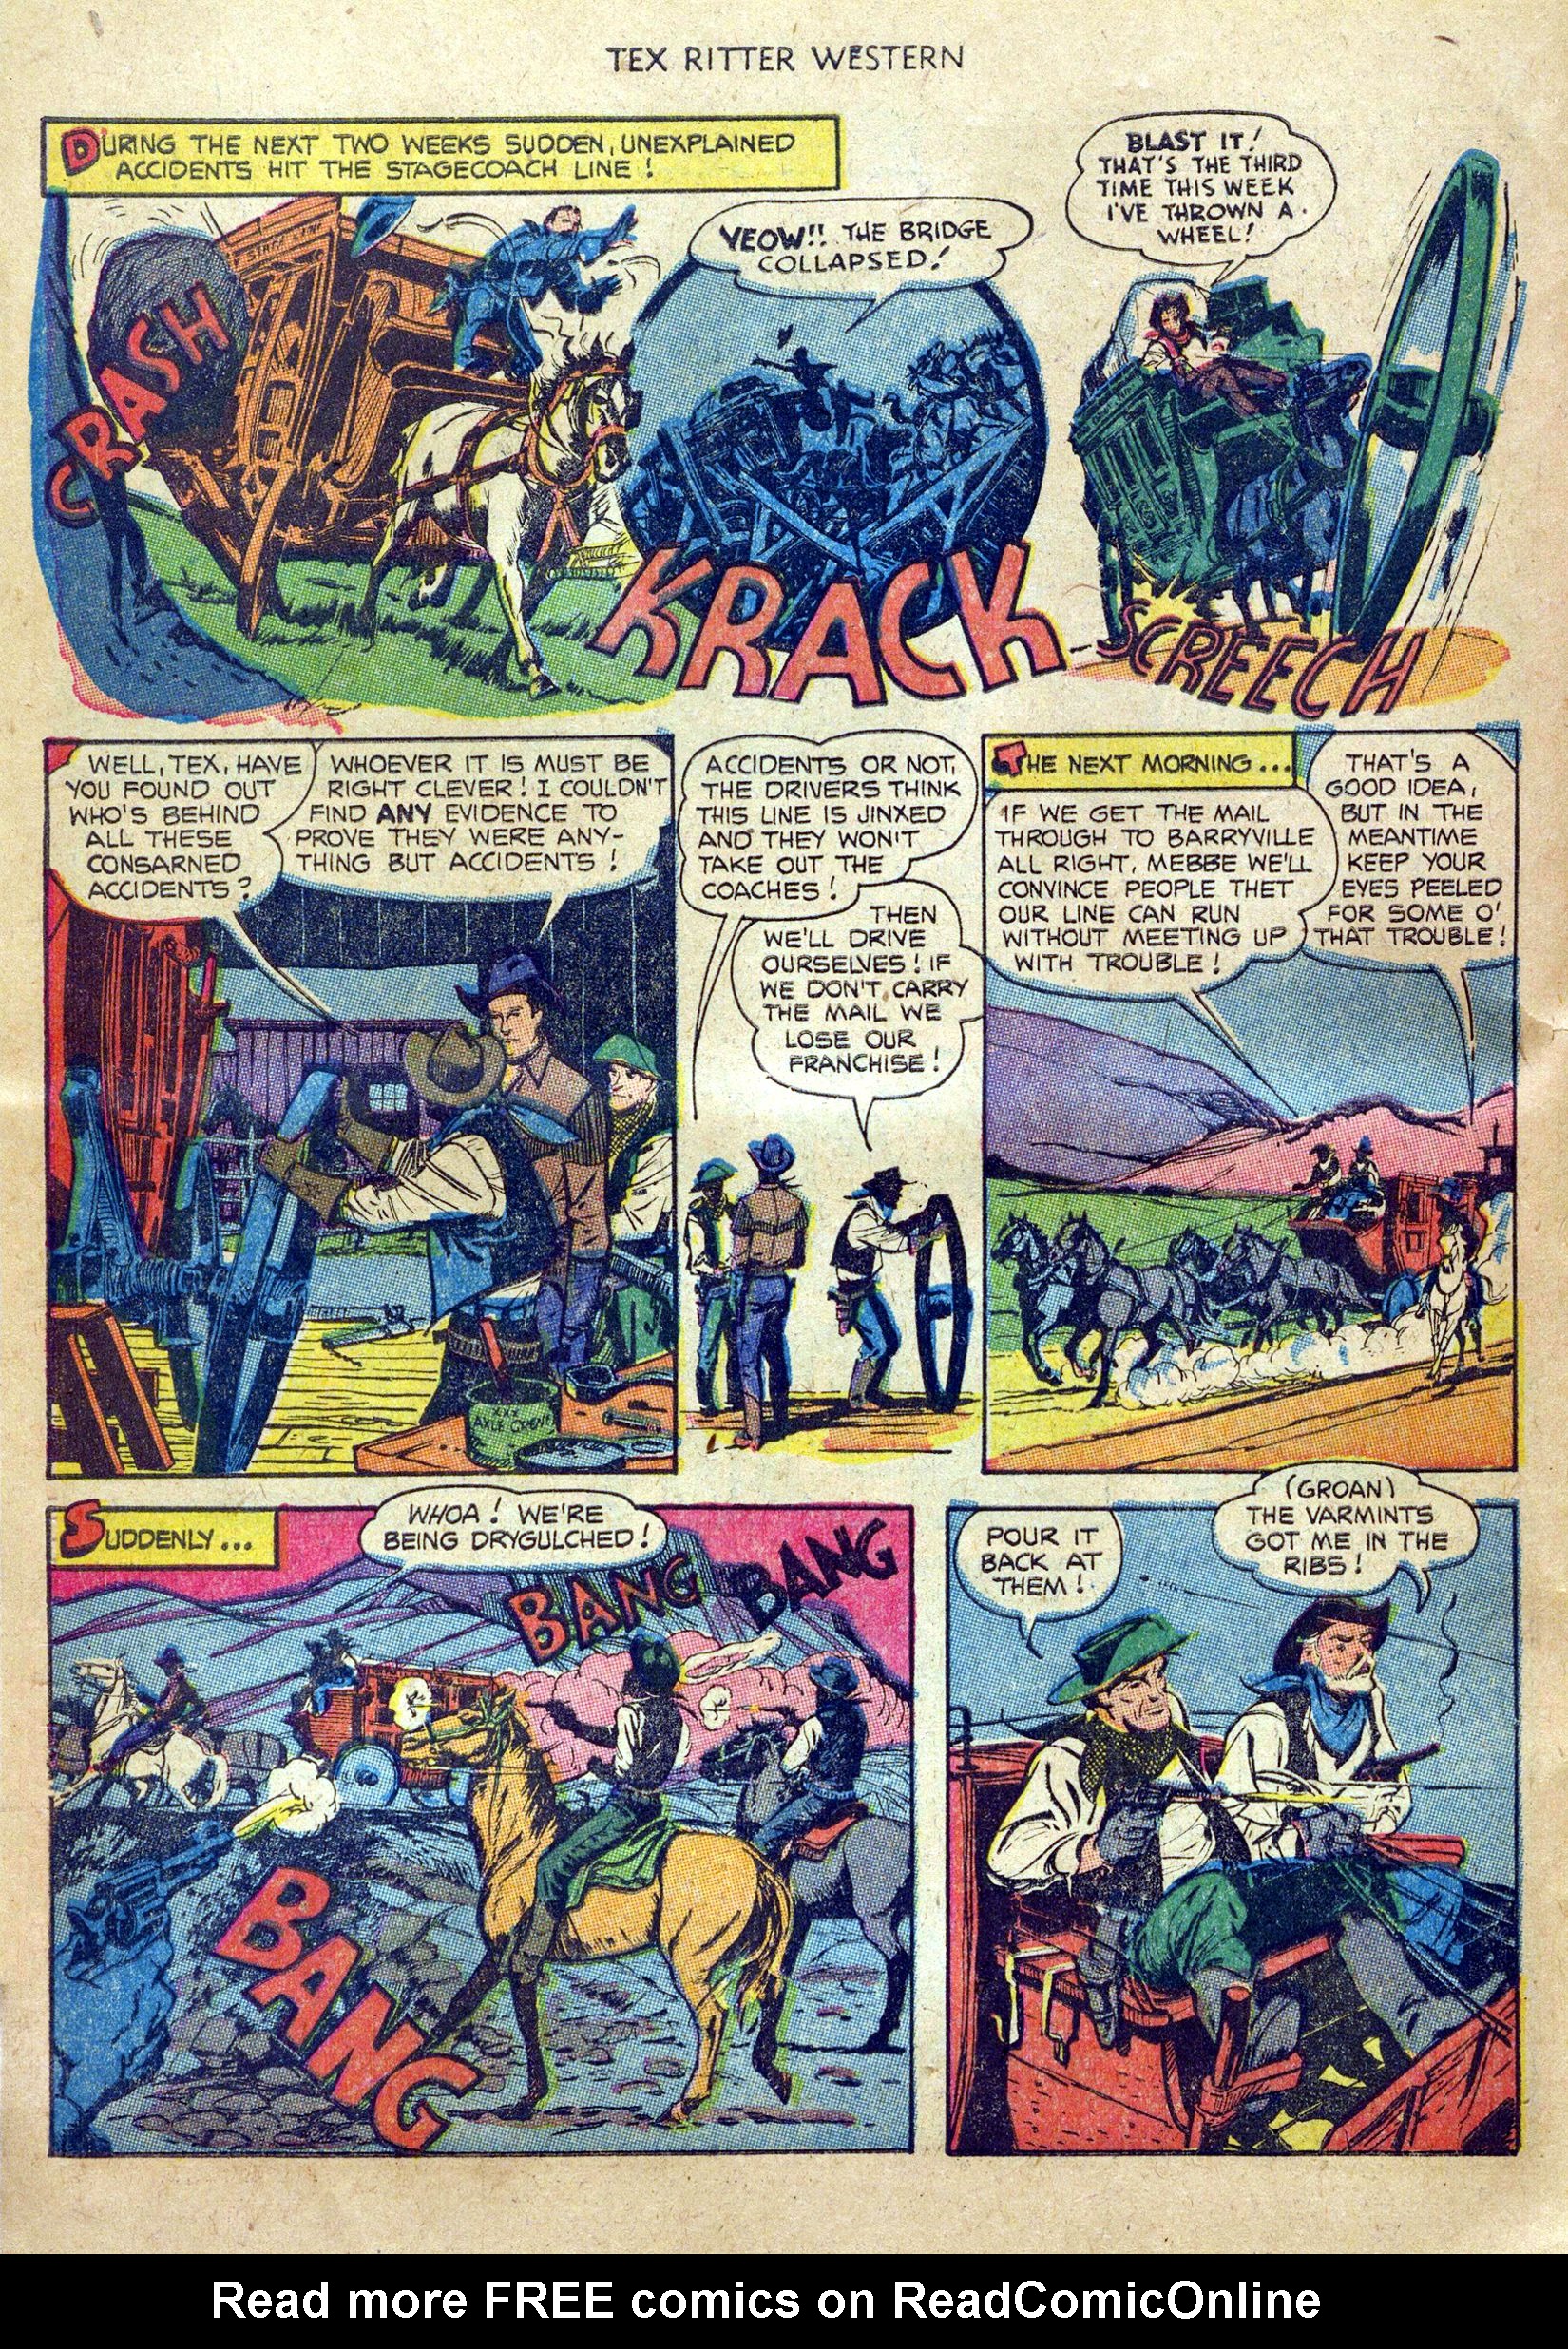 Read online Tex Ritter Western comic -  Issue #20 - 6